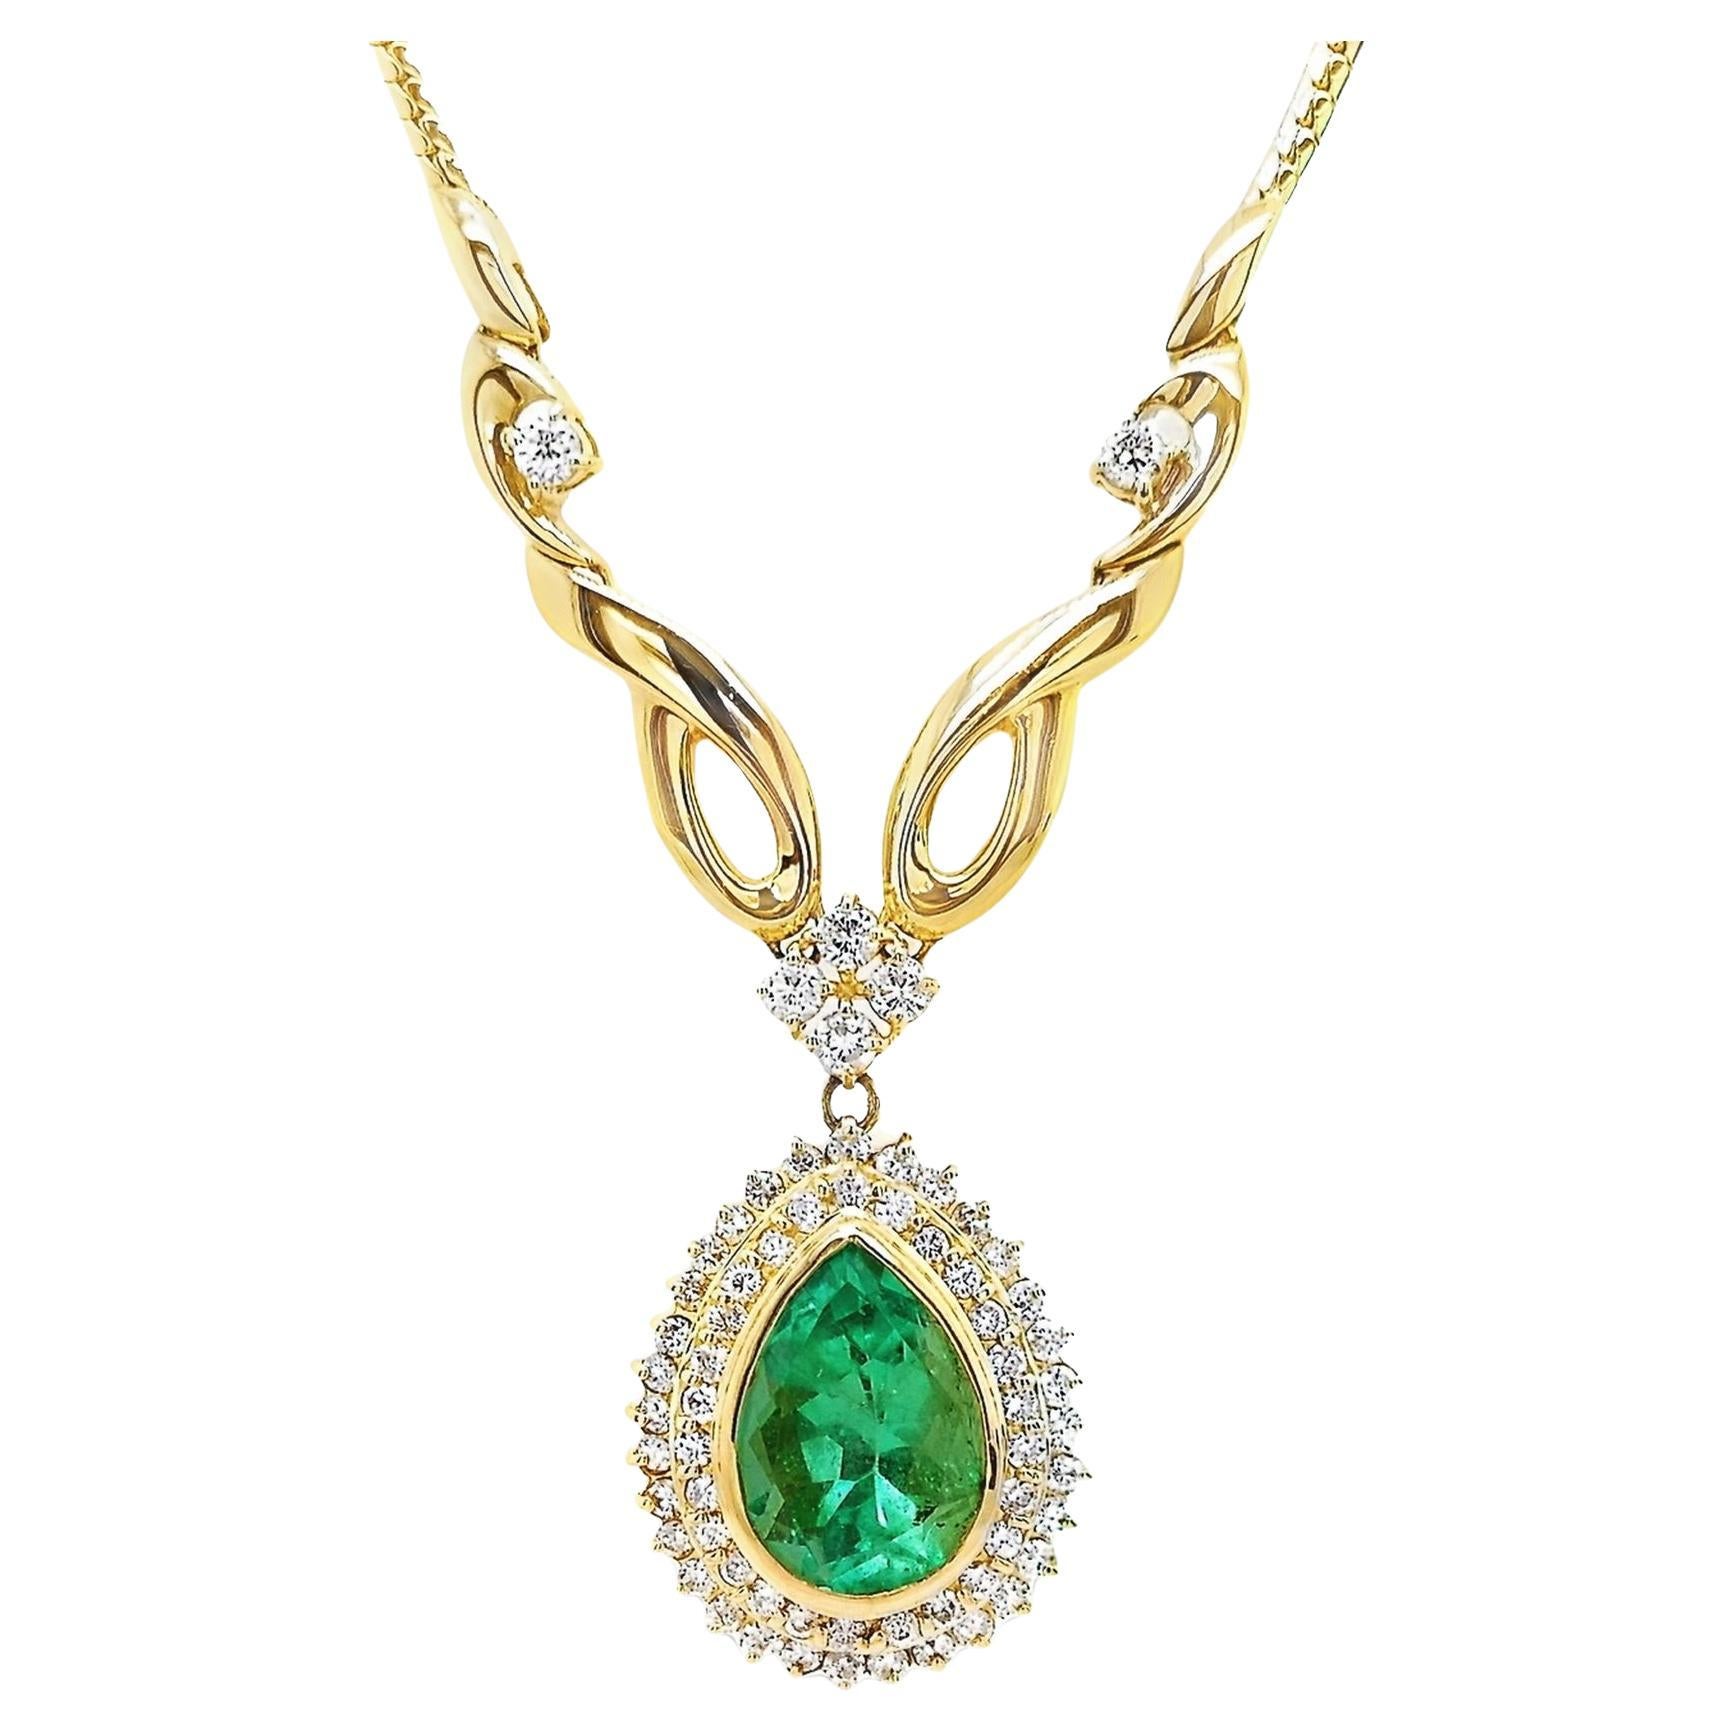 IGI Certified 5.14ct Colombia Emerald 1.46ct Diamonds 18K Yellow Gold Necklace For Sale